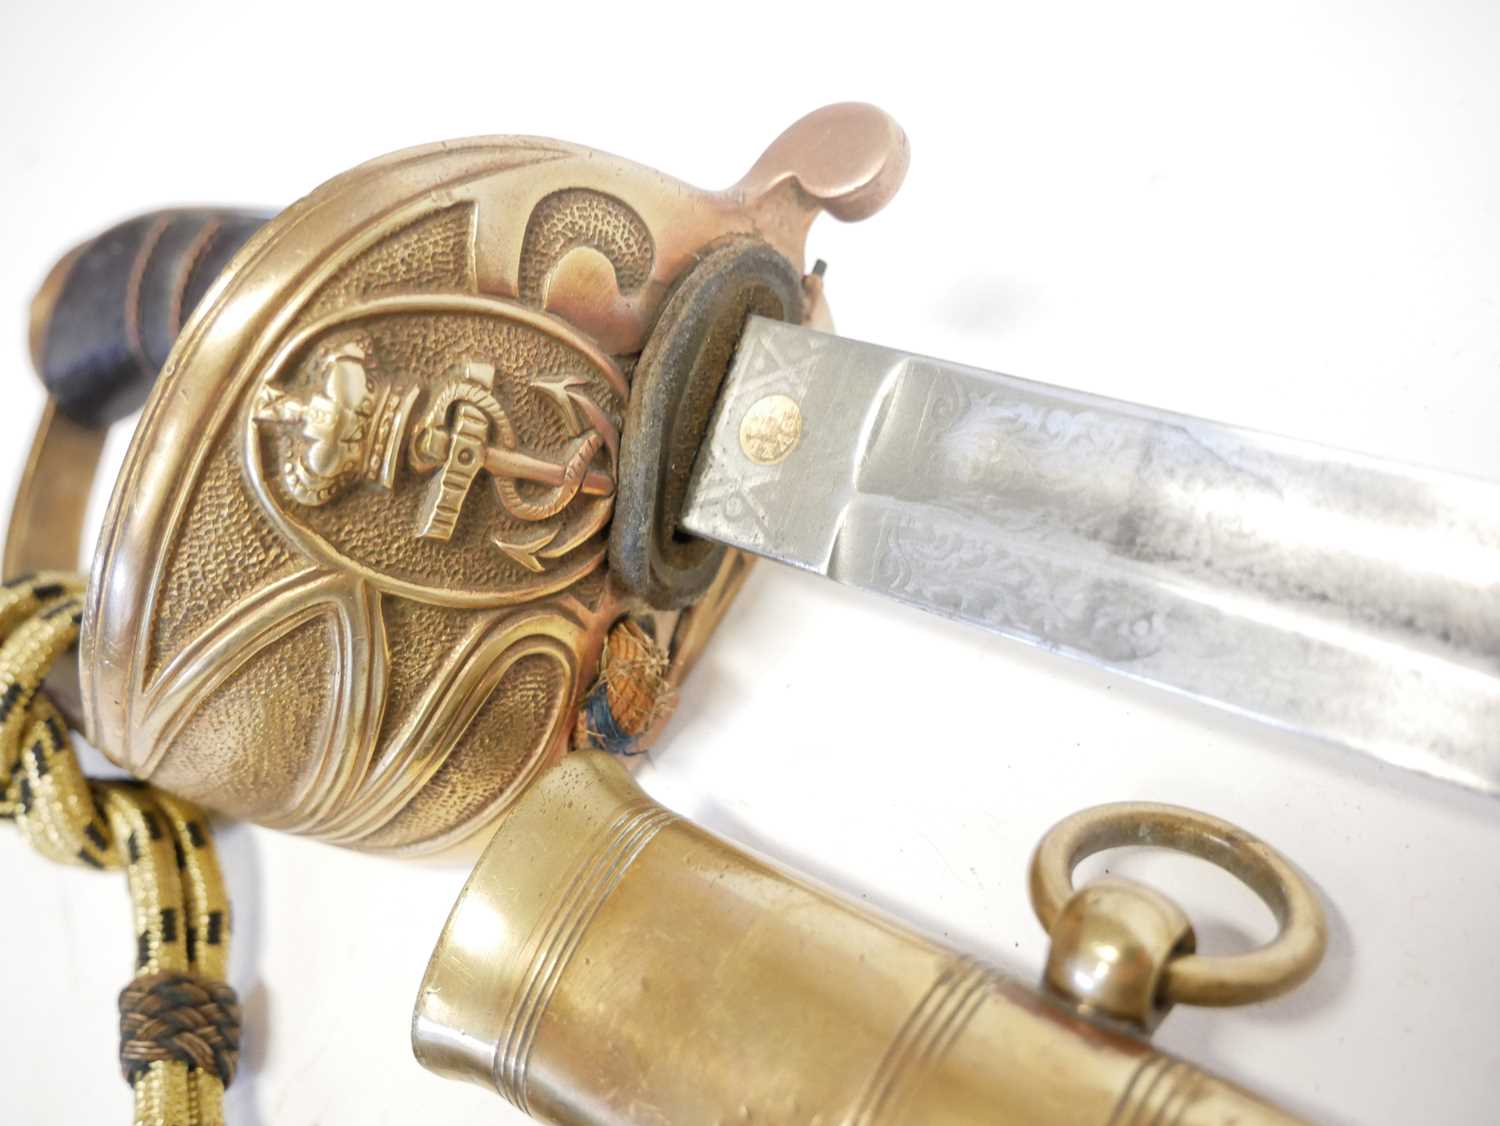 Royal Navy Petty Officer's sword, similar to an 1827 Naval sword but without the lion head pommel, - Image 5 of 16